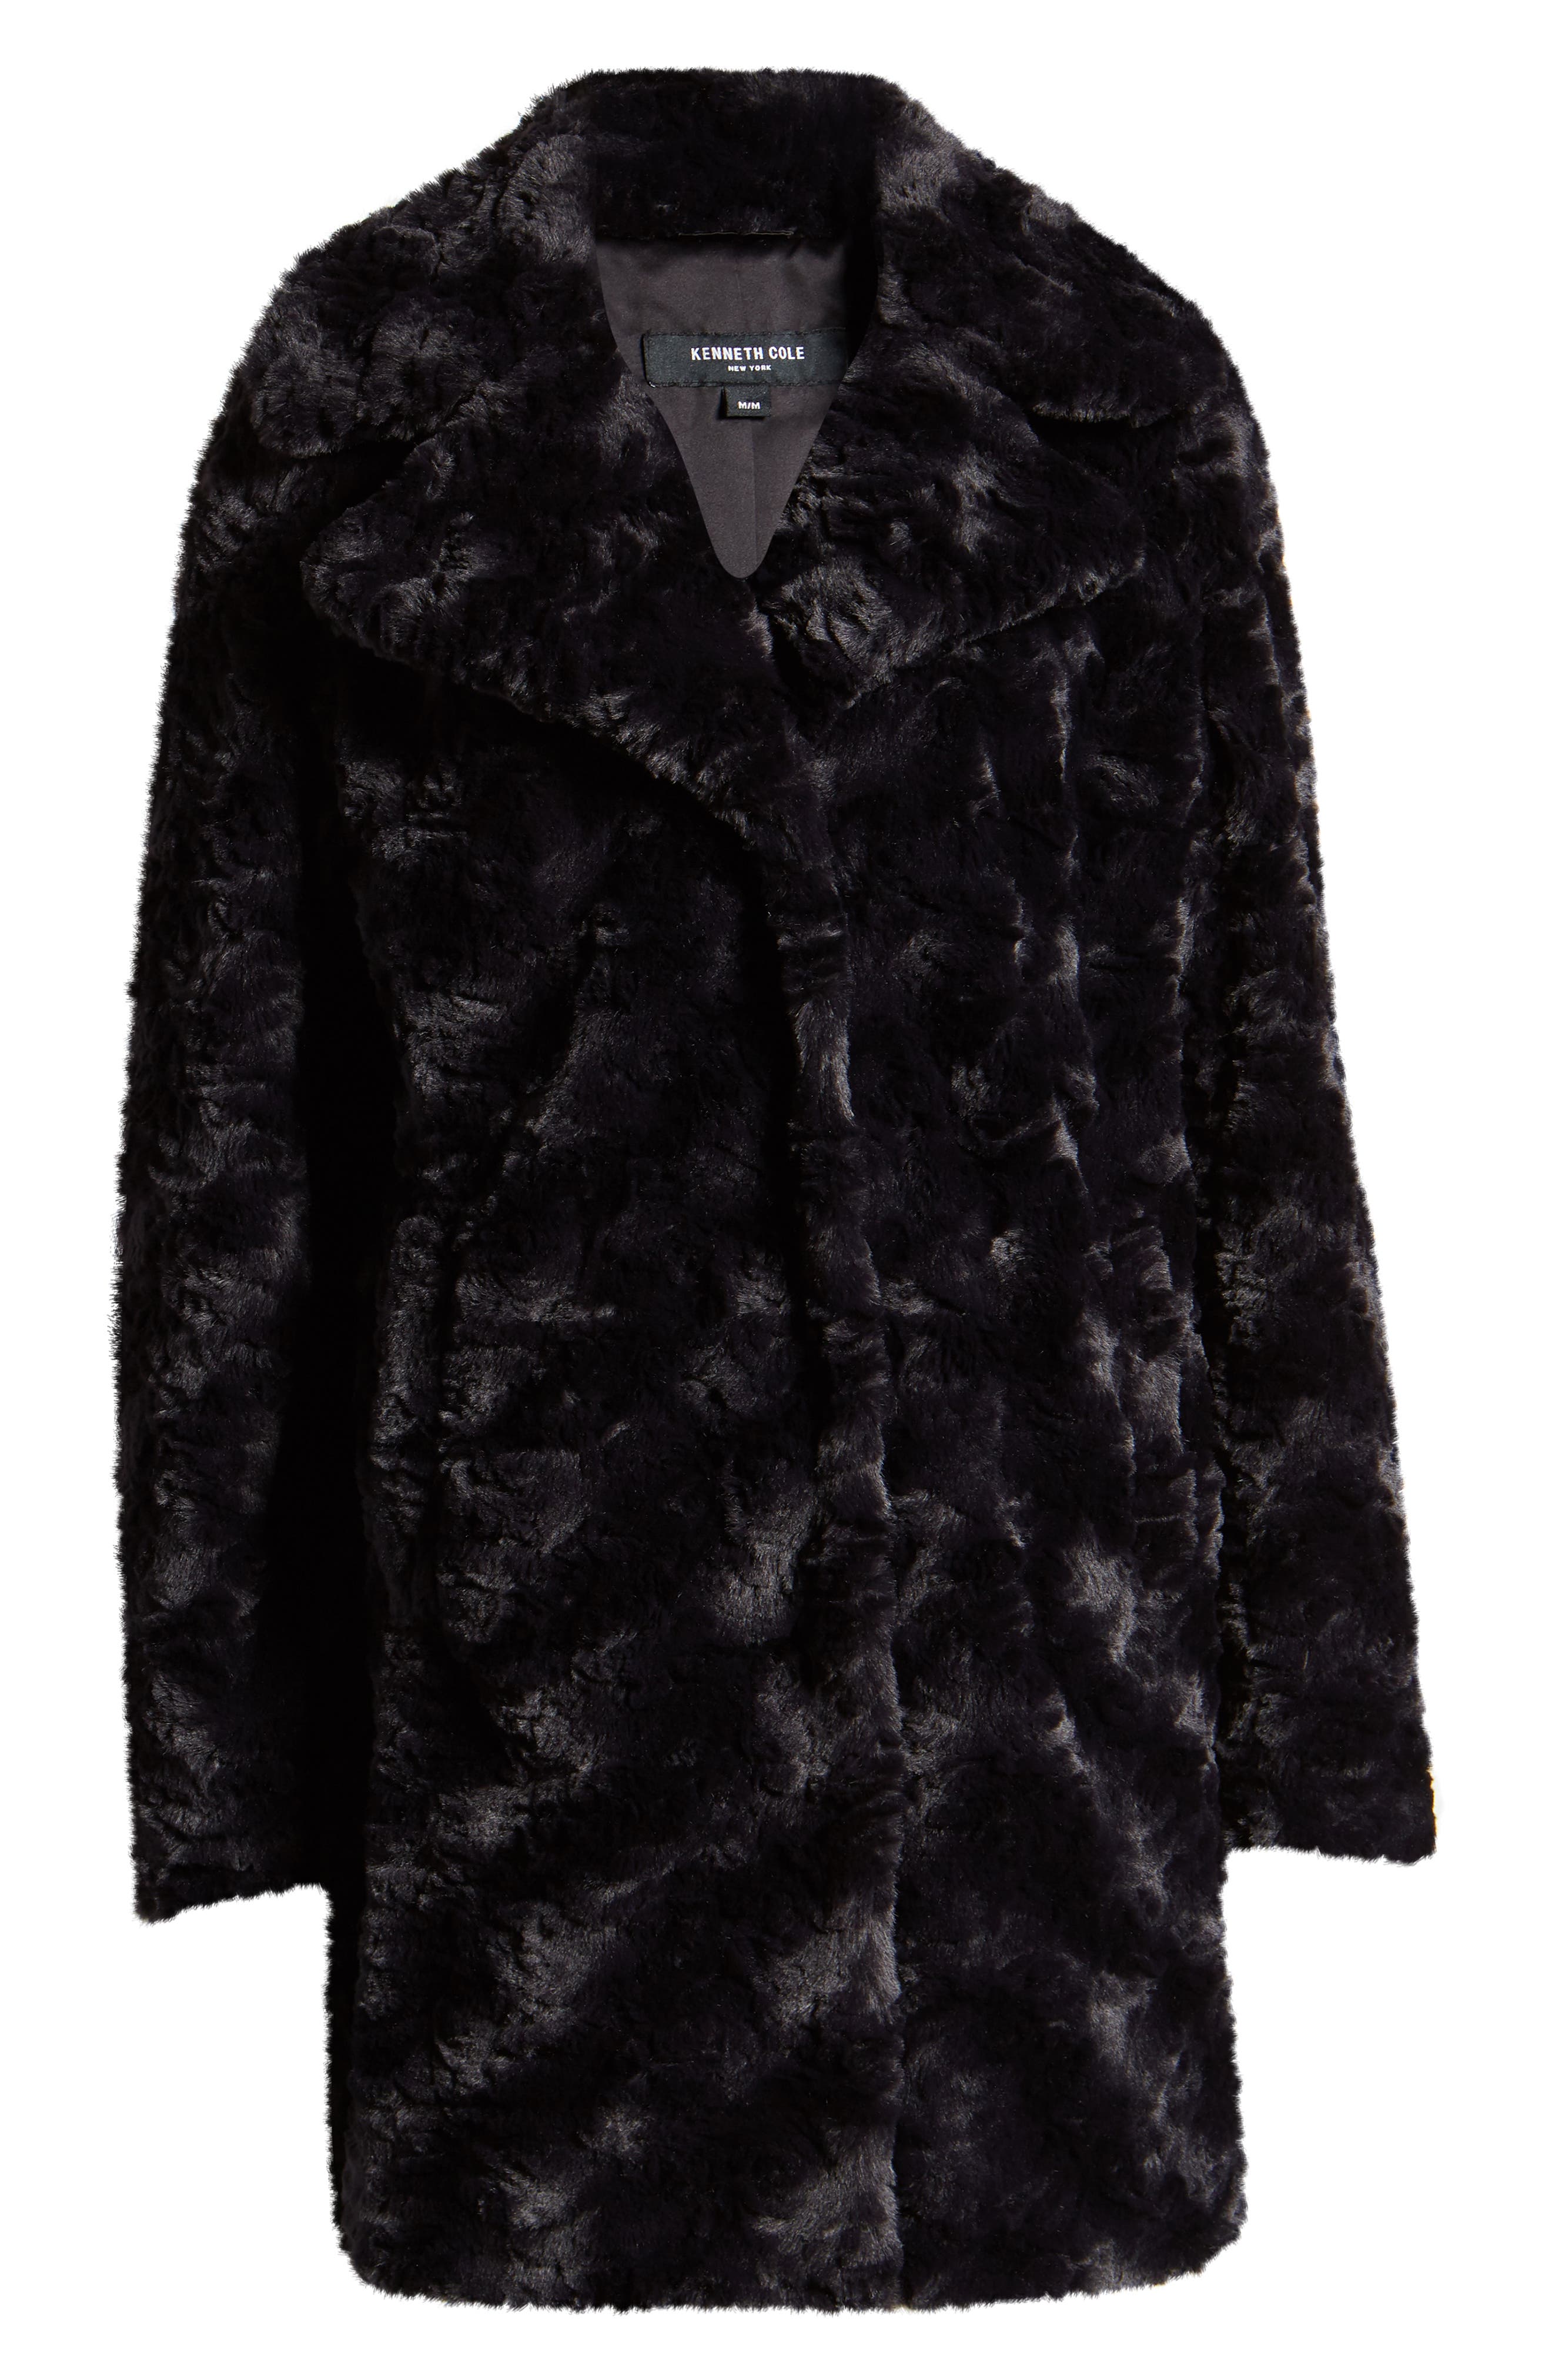 Kenneth Cole New York | Textured Faux Fur Coat | Nordstrom Rack